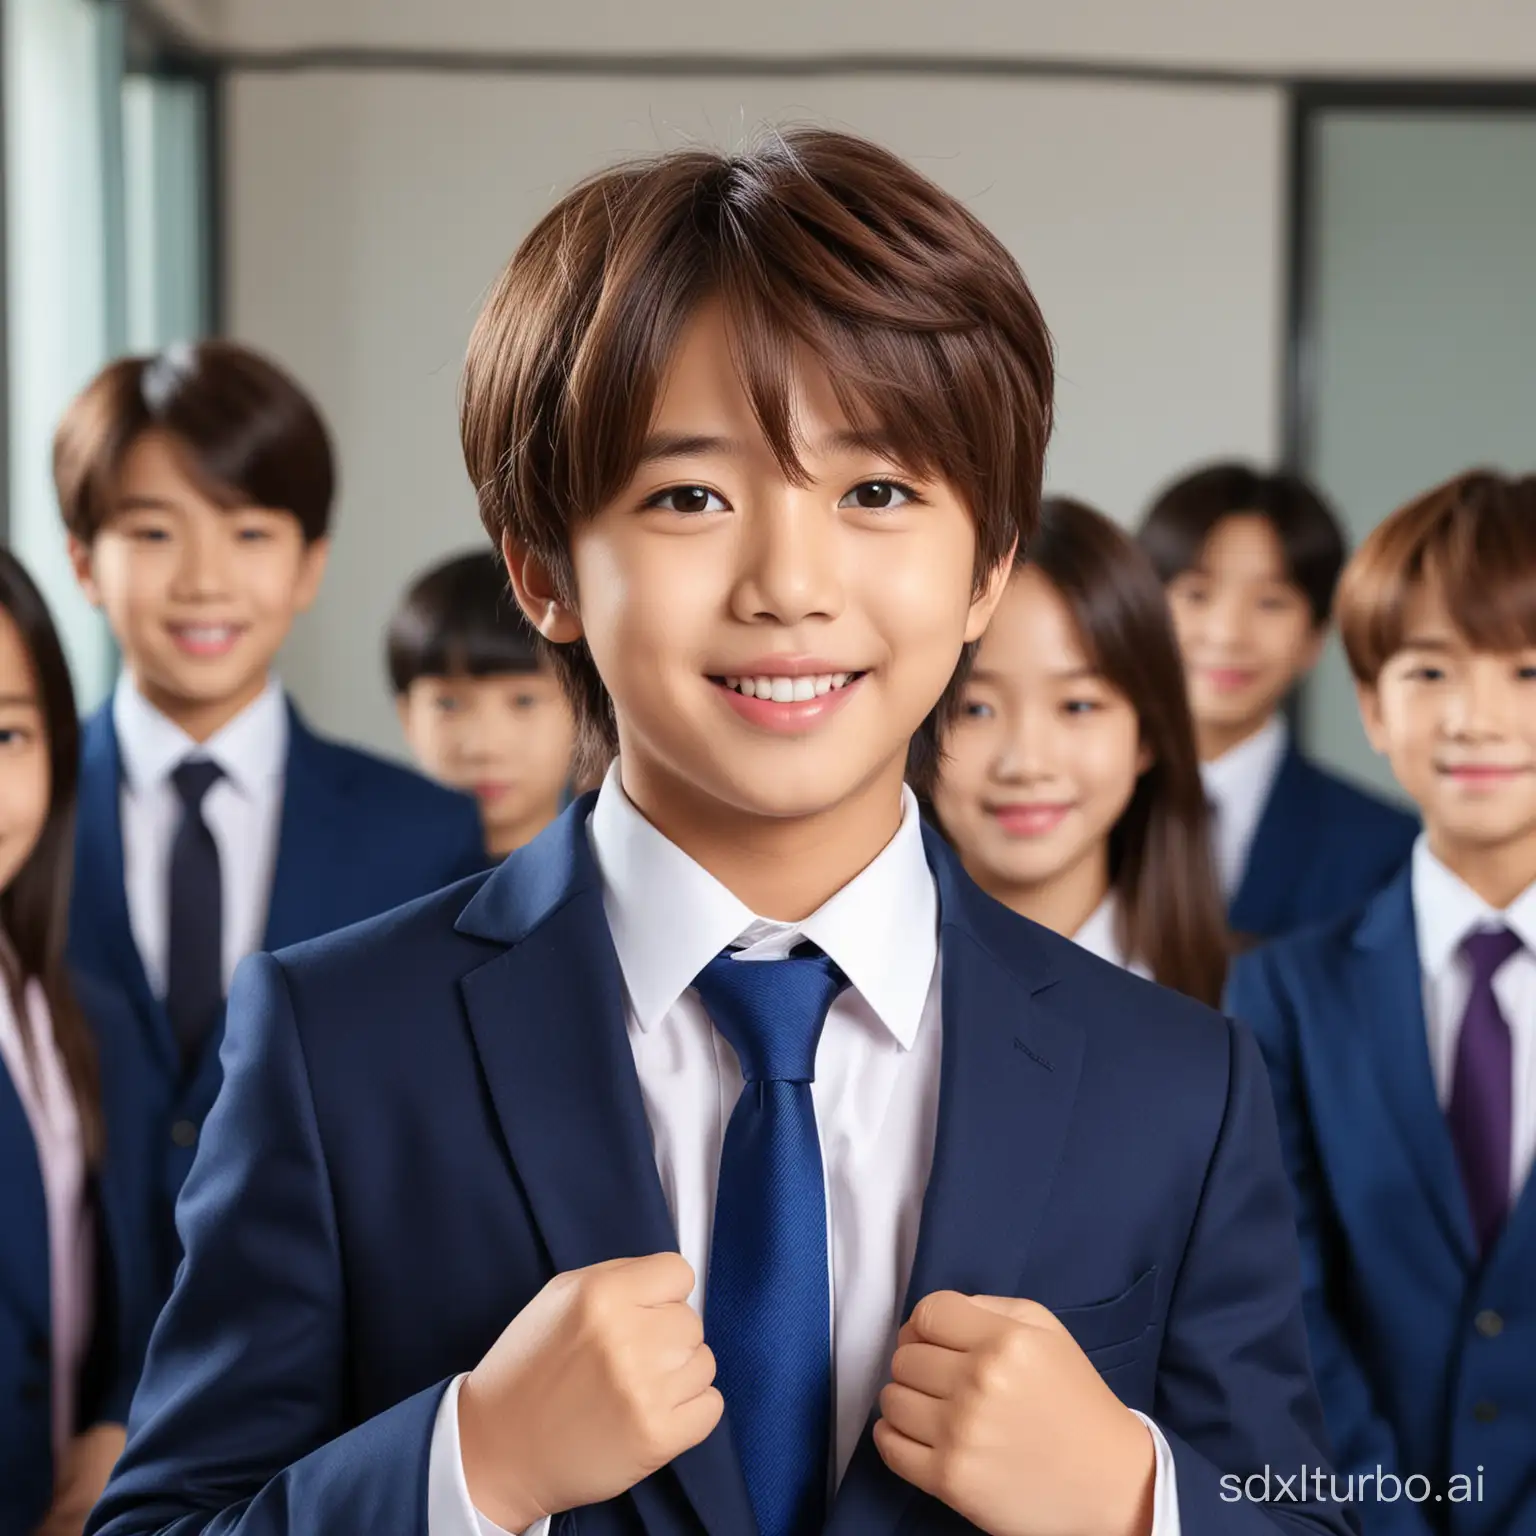 7 YEARS OLD BOY WITH BTS JIN face, BEAUTIFUL HAIR STYLE WITH BLUE SUIT AND TIE, center of frame, smile, smart, ,, he standing  talk to a female teacher,  whole head, they both sides shoulders, suit are in the frame